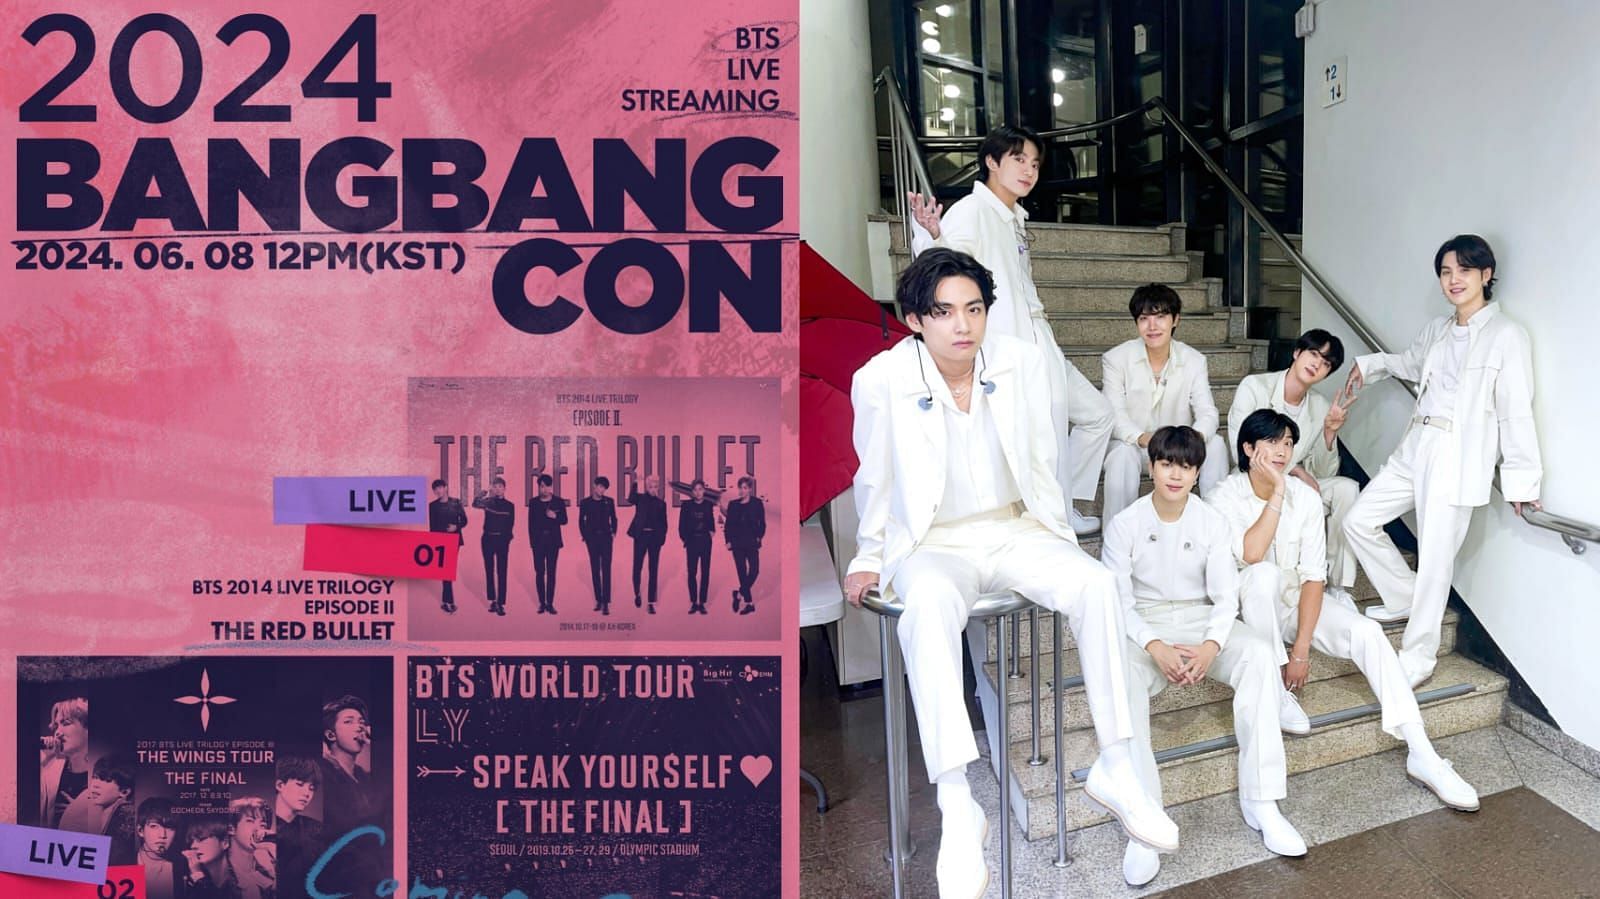 BTS drops an official poster for BANGBANGCON (Image via @bts_bighit/X)